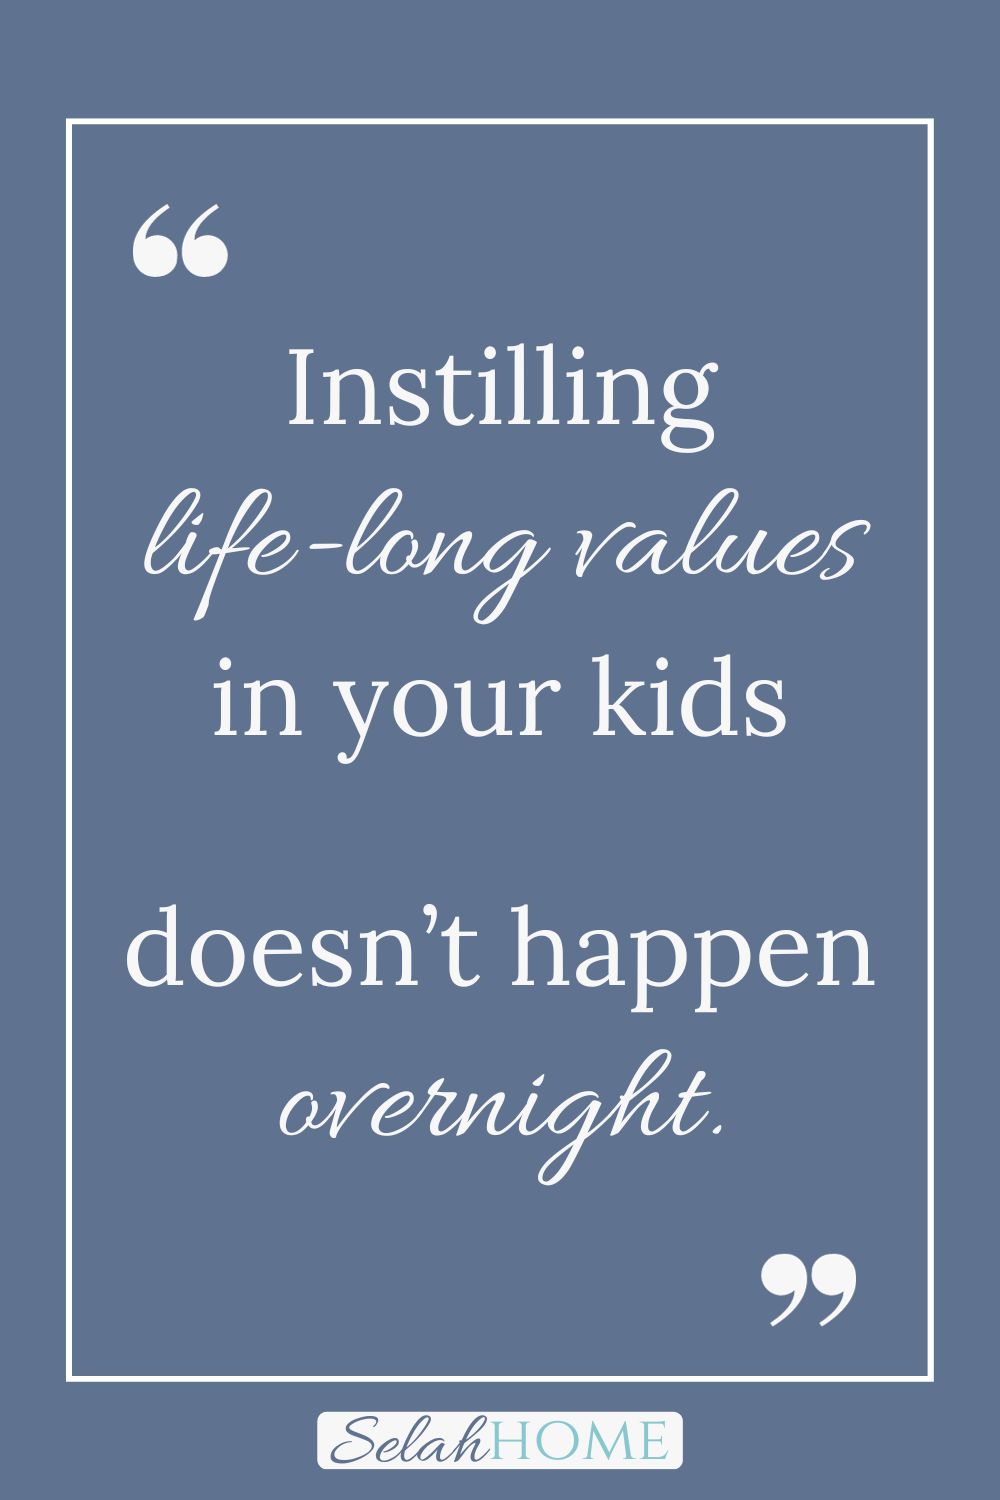 A quote for this post about the importance of giving that reads, "Instilling life-long values in your kids doesn't happen overnight."